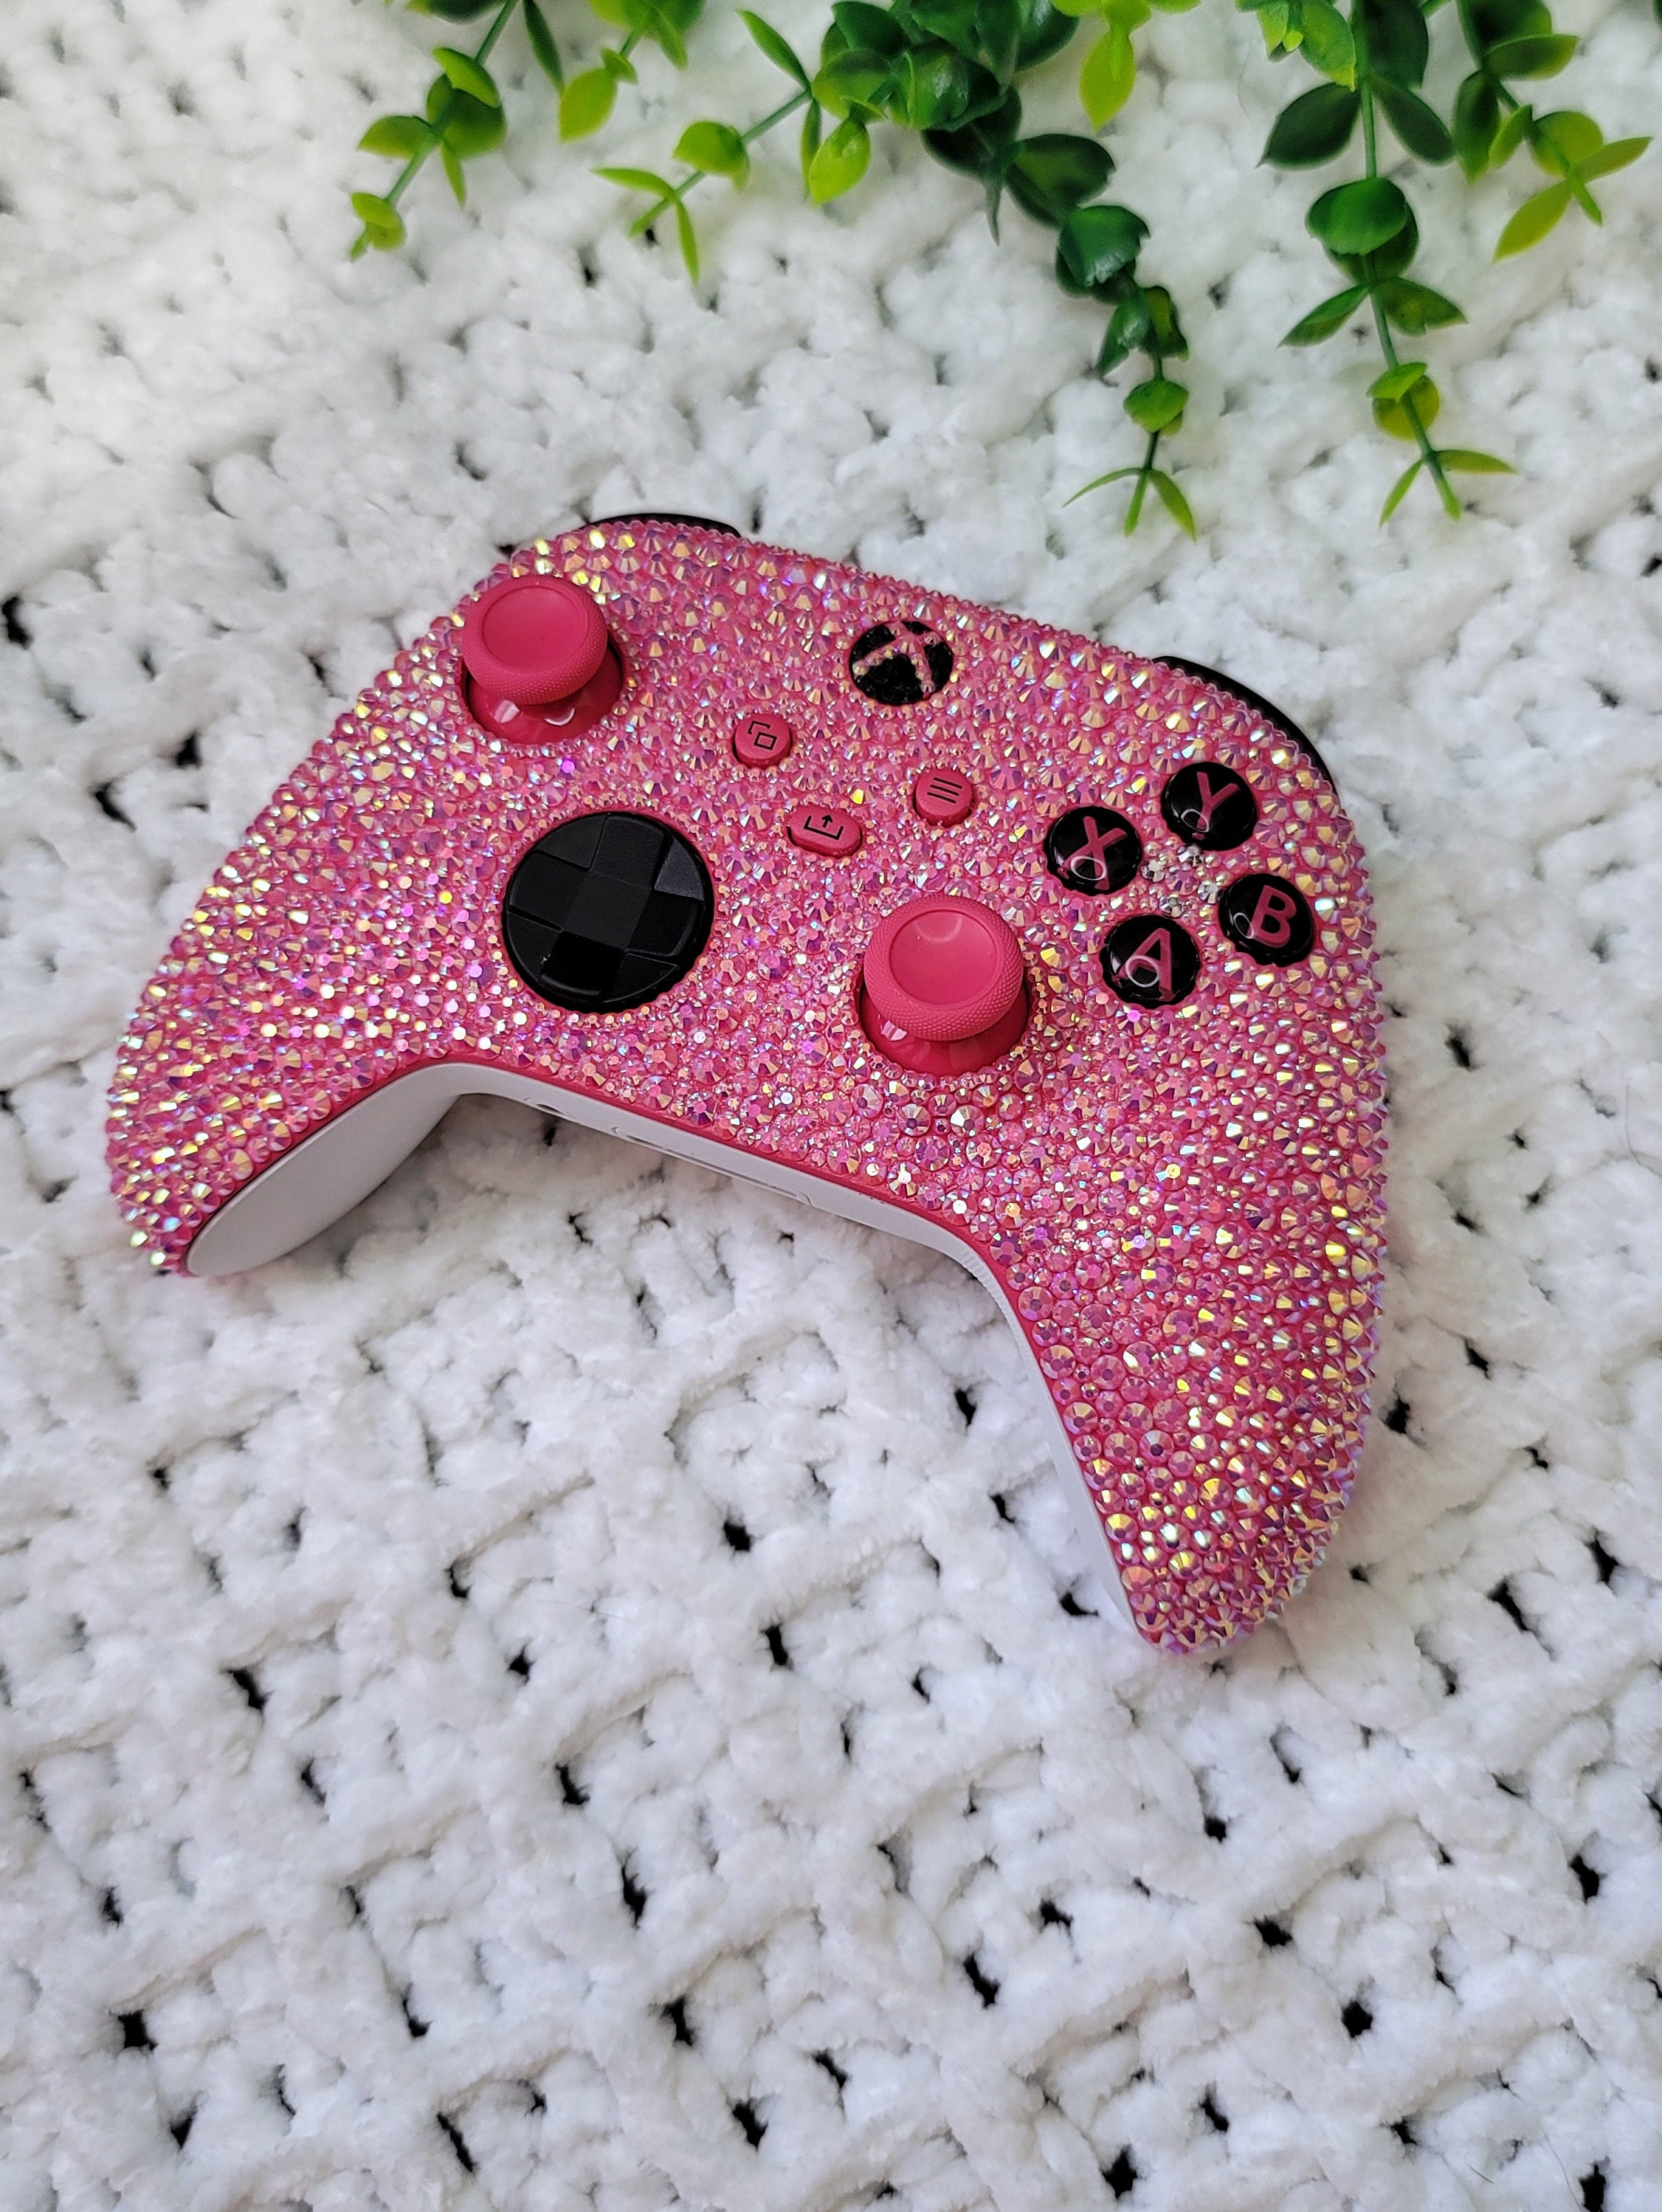 Custom Handmade Bling,glam Rhinestone Gems, Crystal Sparkly, Bedazzled  Girly Gamer Girl, Xbox/ps4,video Game Electronic Wireless Controllers 